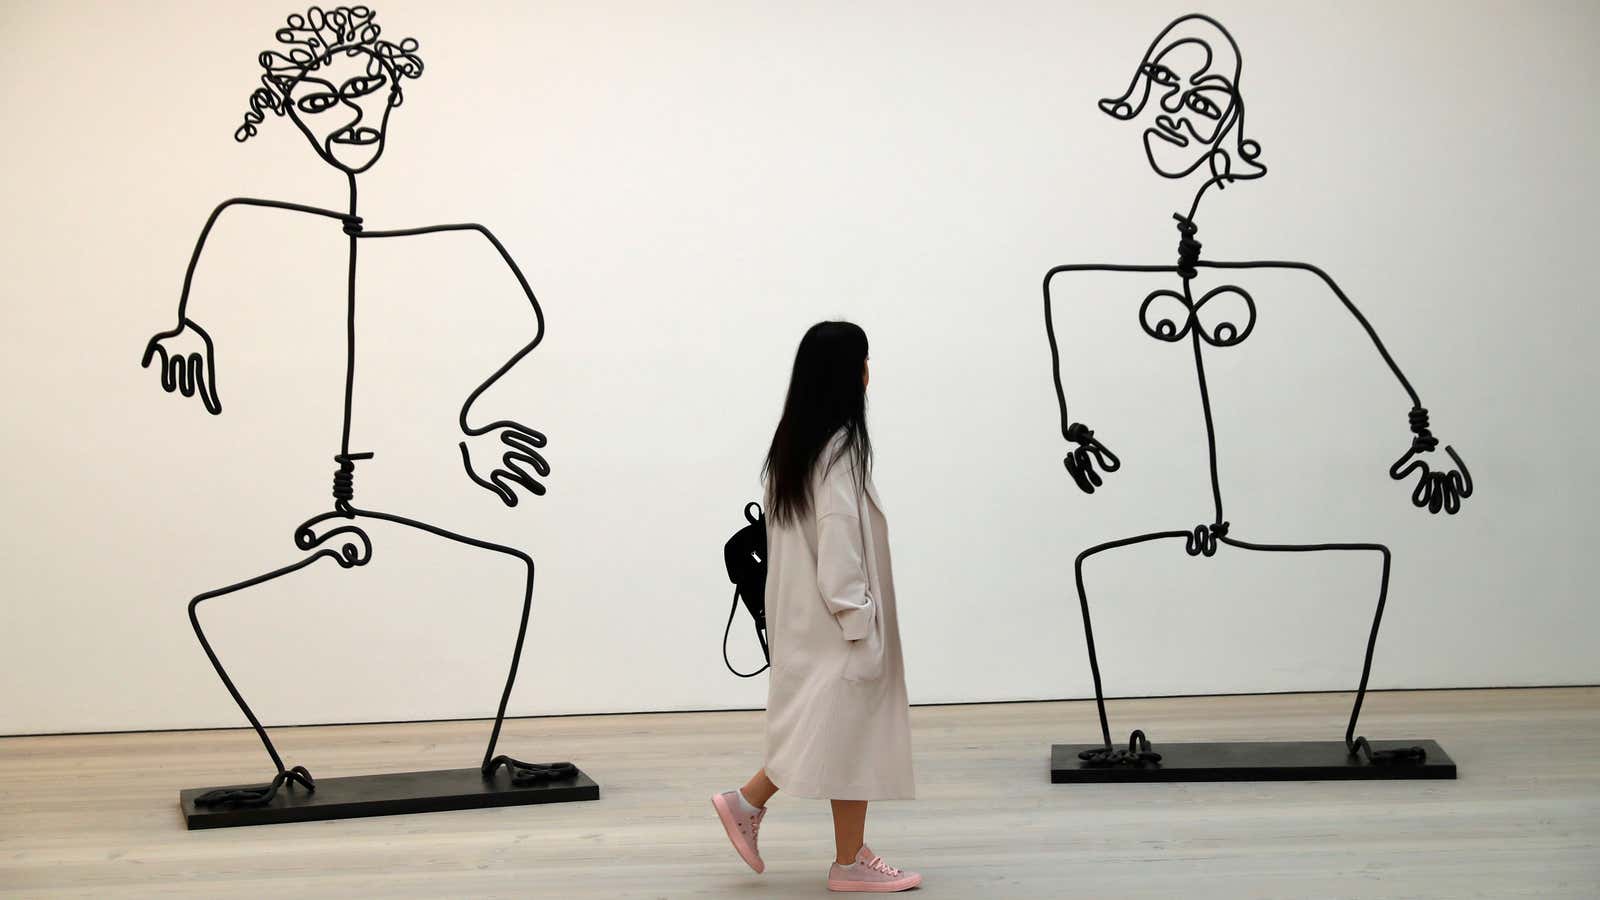 Could e-commerce ever replace interacting with the art?